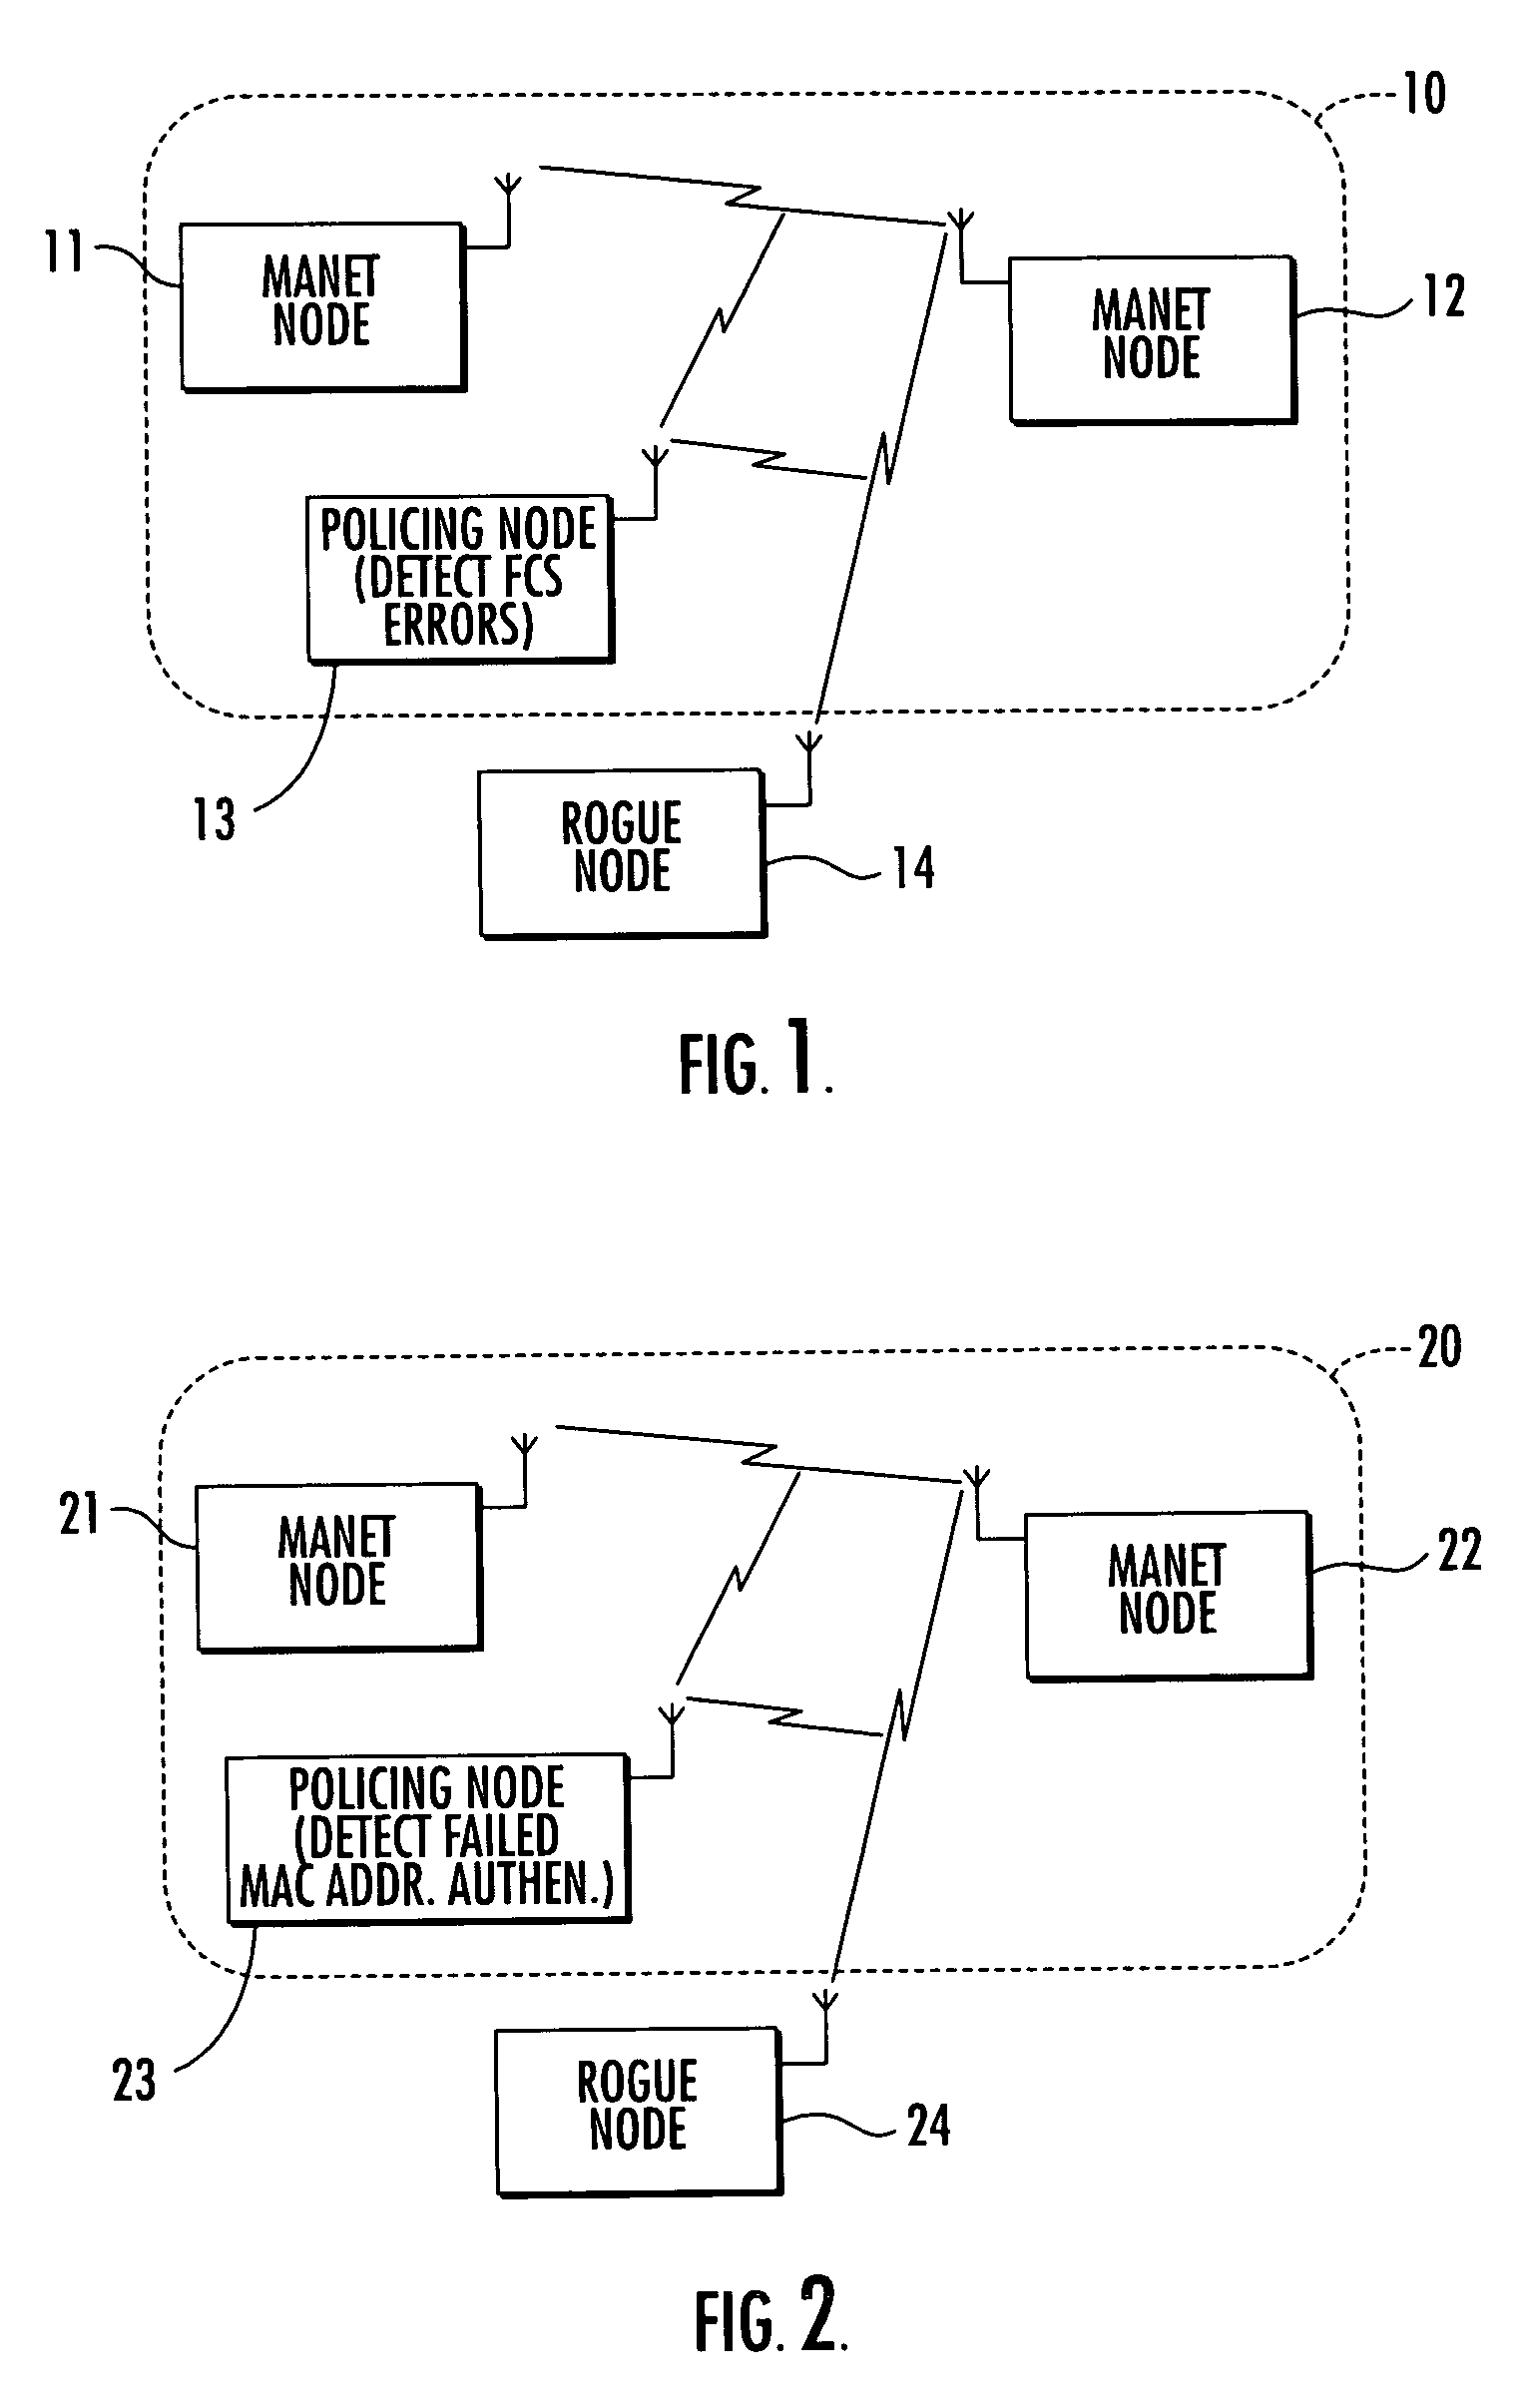 Mobile ad-hoc network with intrusion detection features and related methods